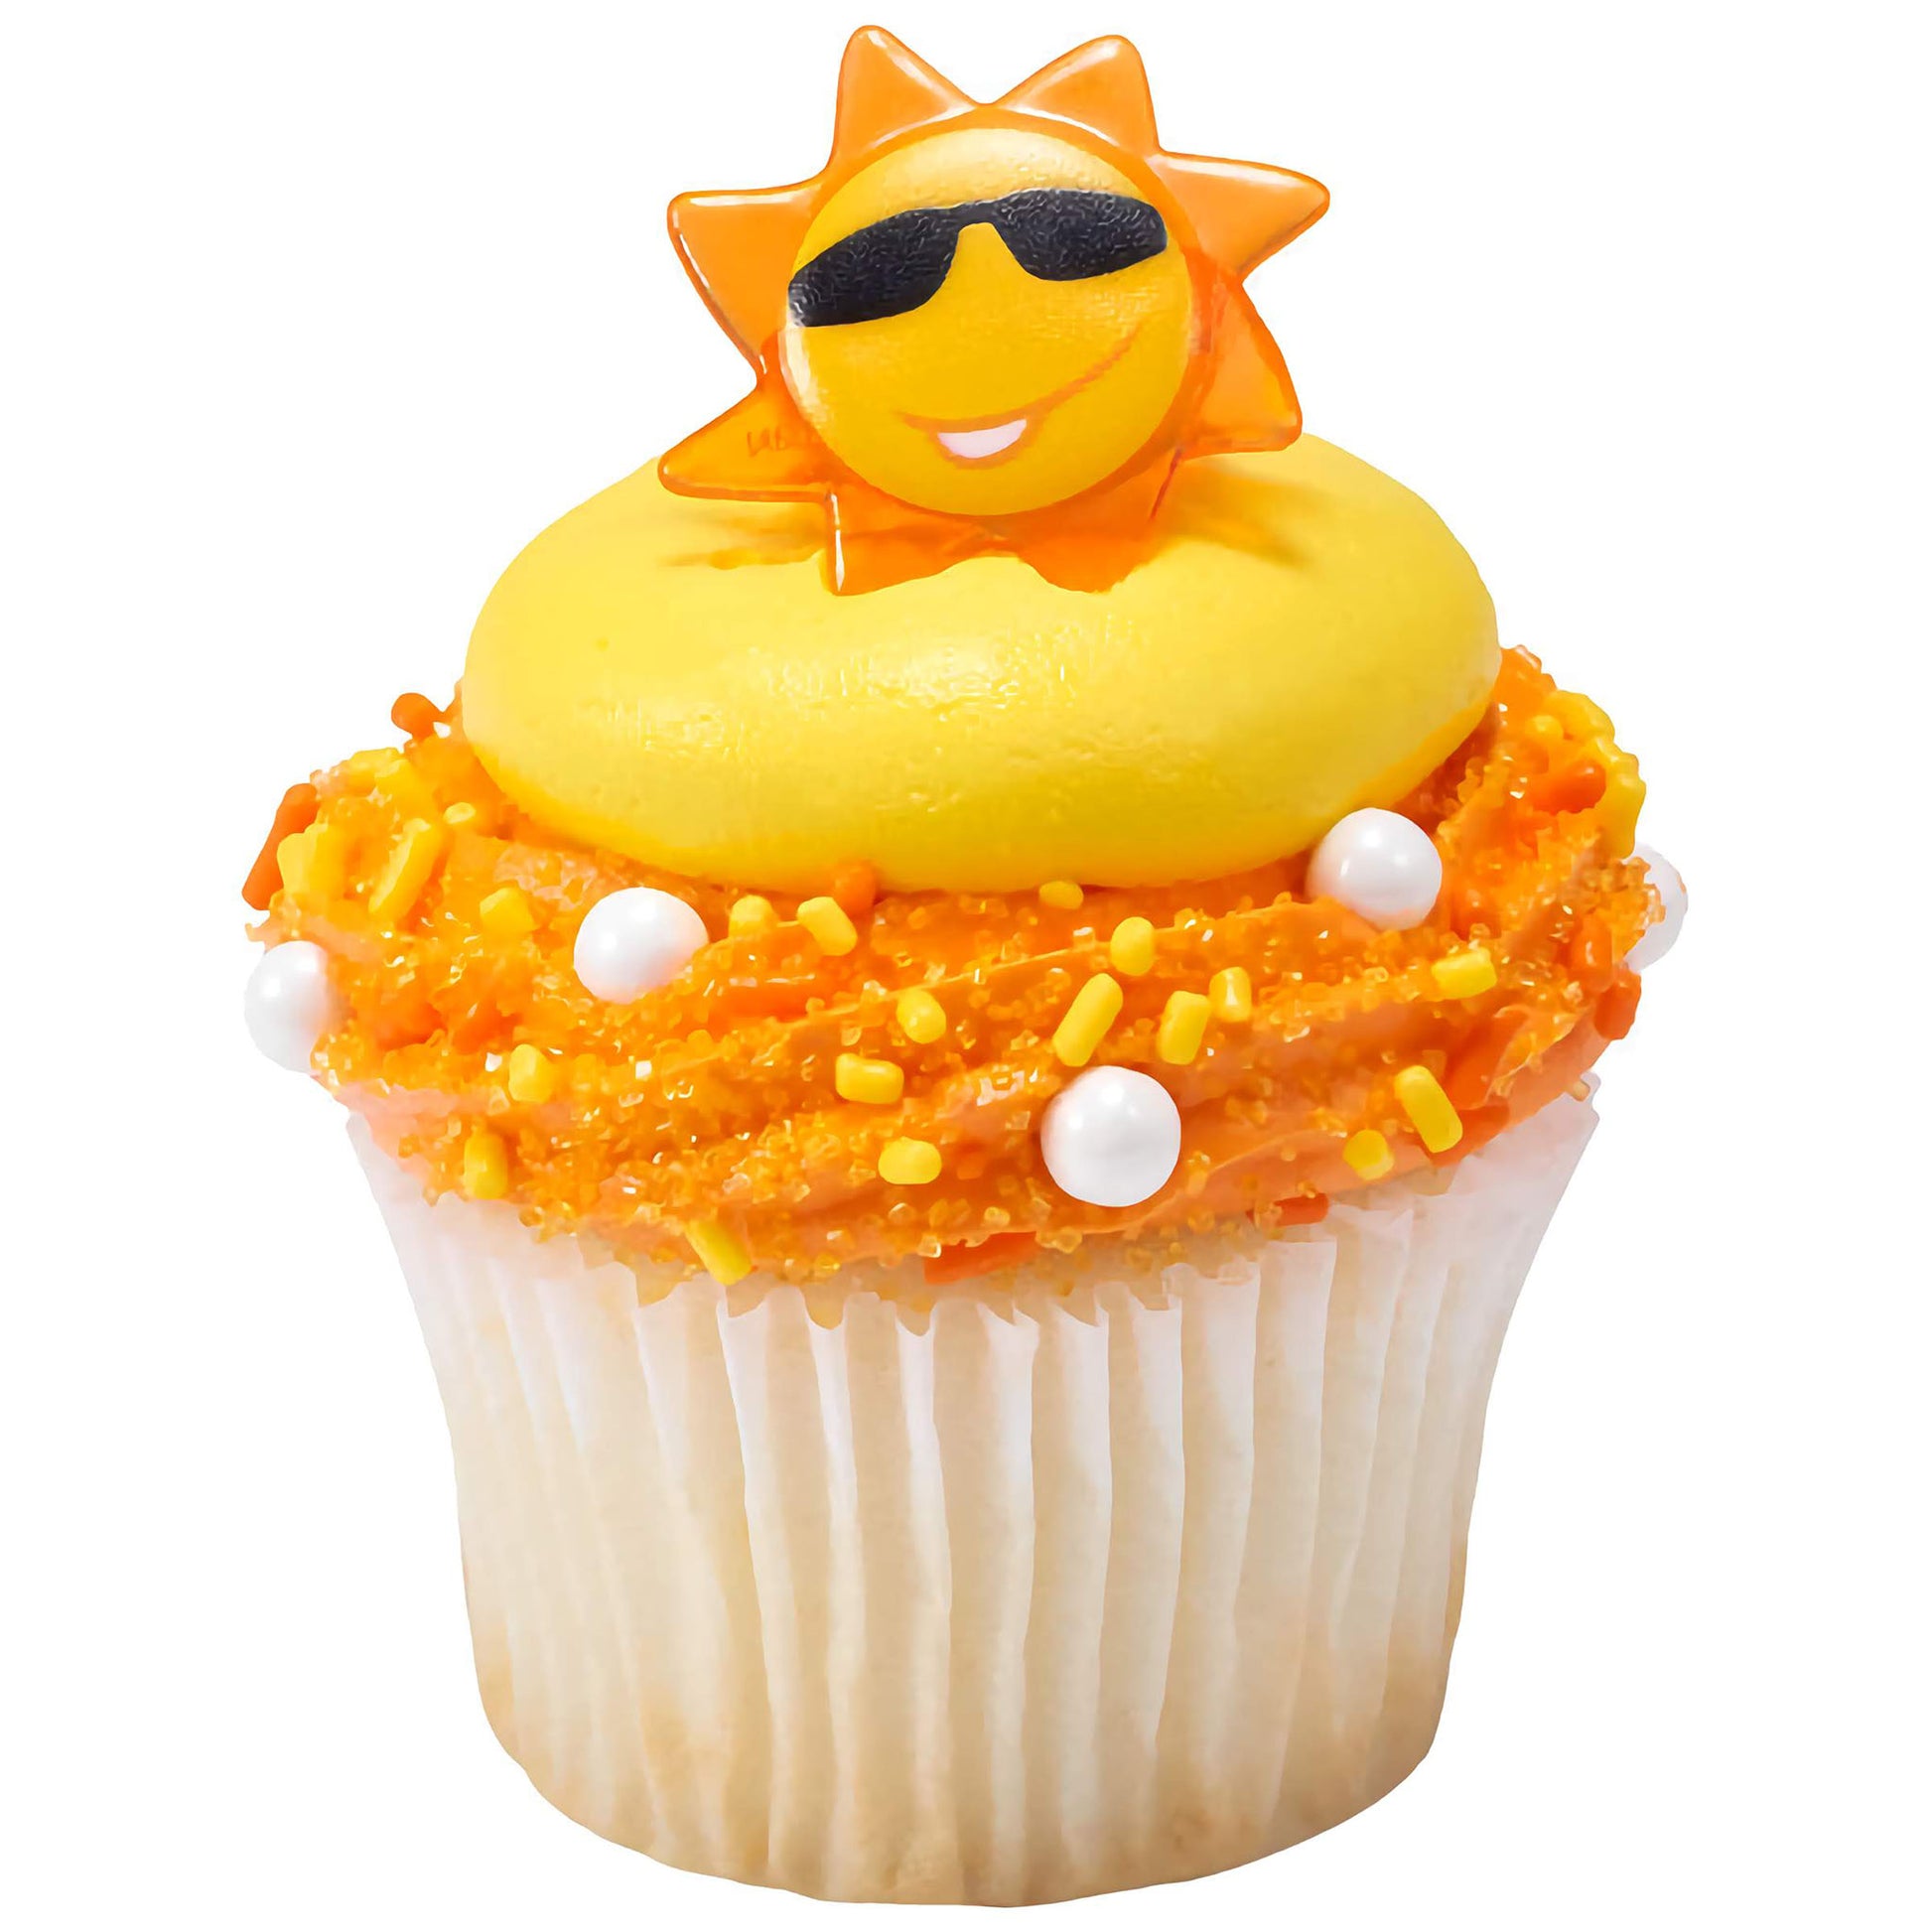 A vibrant orange frosted cupcake topped with a smiling sun decoration and white edible sugar pearls, creating a cheerful summer-themed dessert.